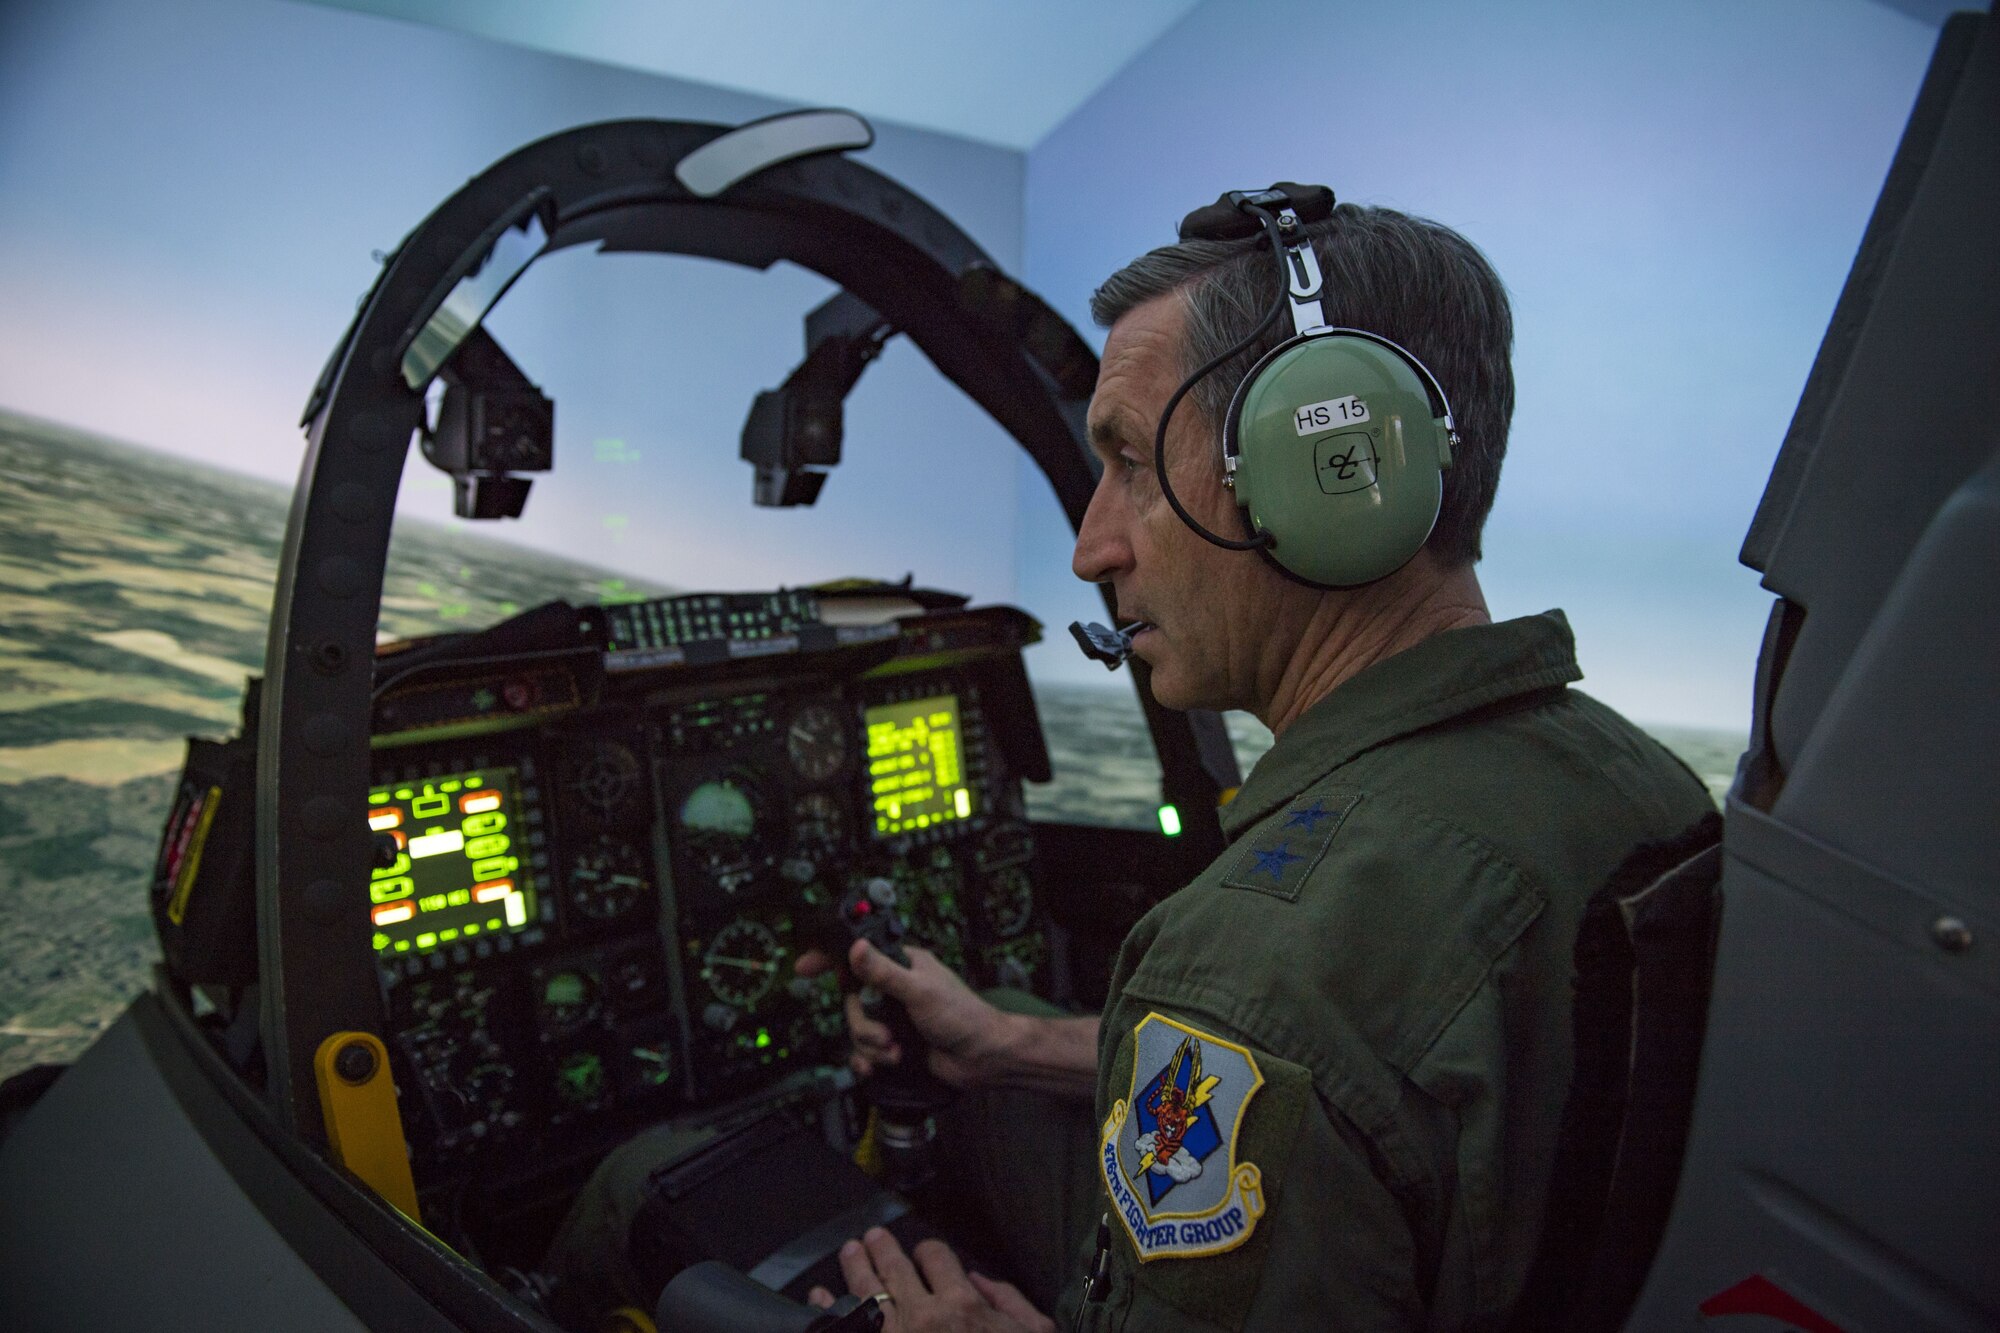 Maj. General Ronald Bruce Miller, 10th Air Force commander, looks to the side as he flies an A-10C Thunderbolt II during a simulated flight, Jan. 8, 2018, at Moody Air Force Base, Ga. The 10th Air Force leadership visited Moody to discuss the future deployments and changes to their units. (U.S. Air Force photo by Senior Airman Janiqua P. Robinson)